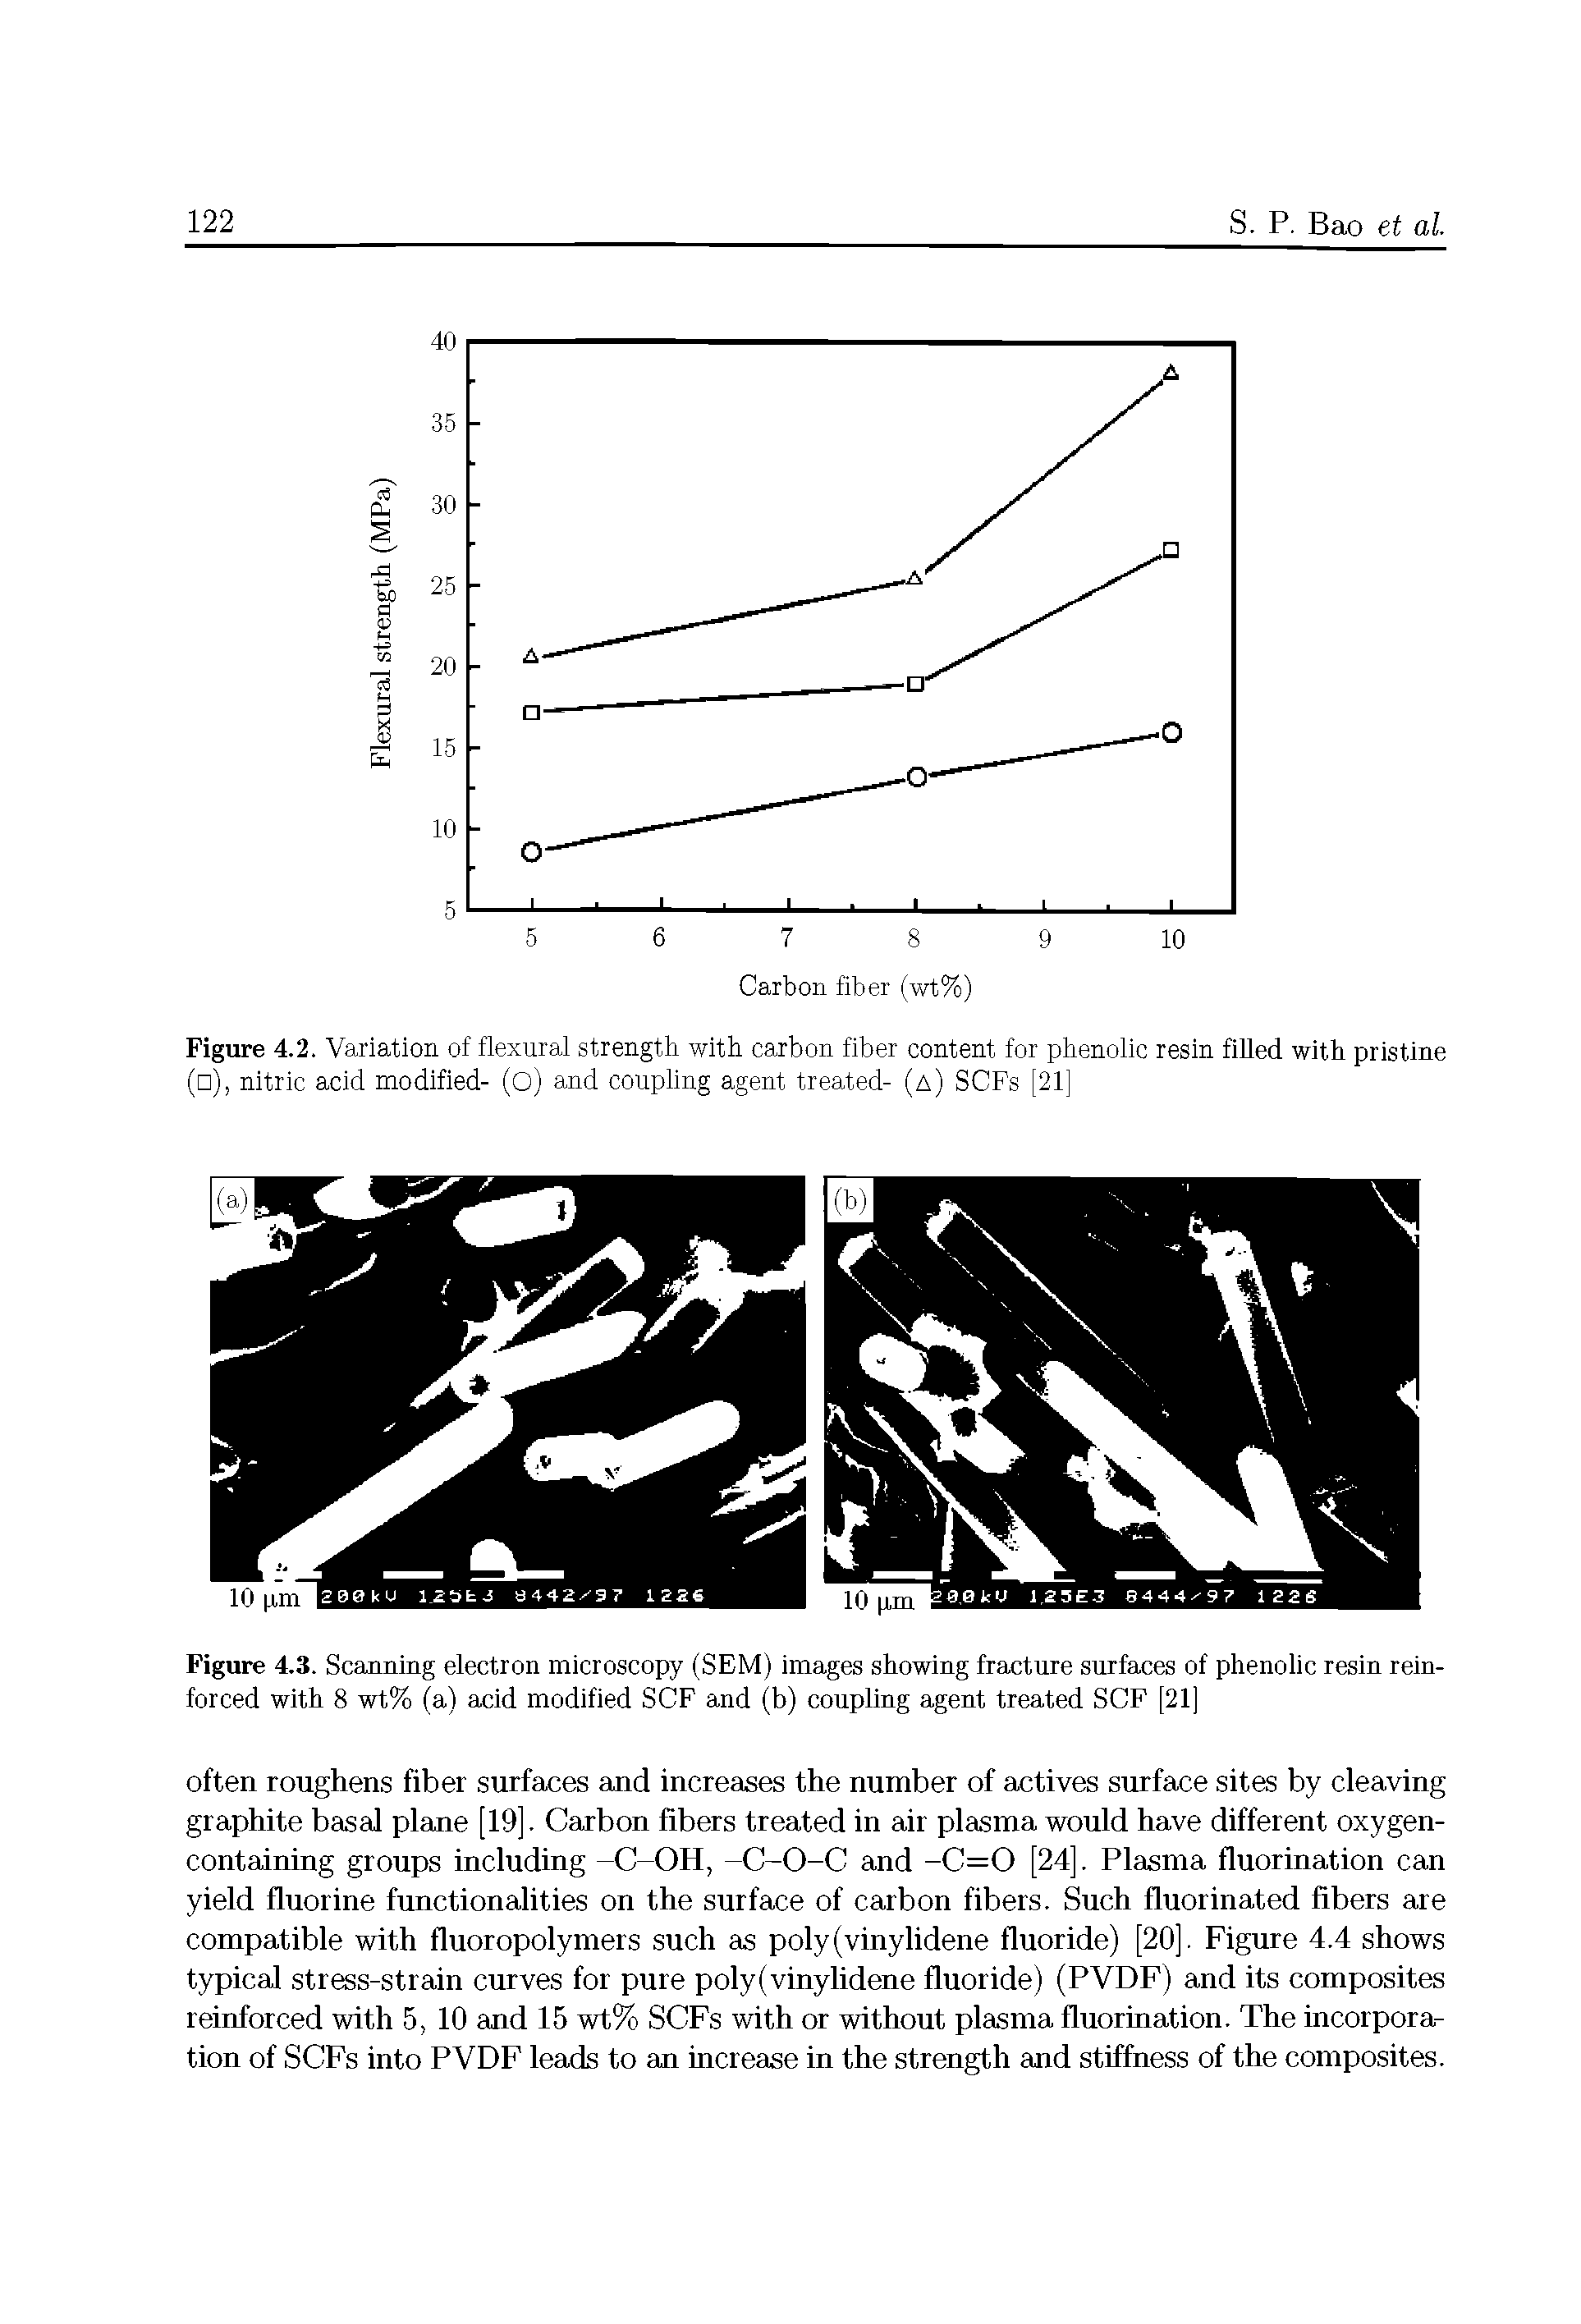 Figure 4.3. Scanning electron microscopy (SEM) images showing fracture surfaces of phenolic resin reinforced with 8 wt% (a) acid modified SCF and (b) coupling agent treated SCF [21]...